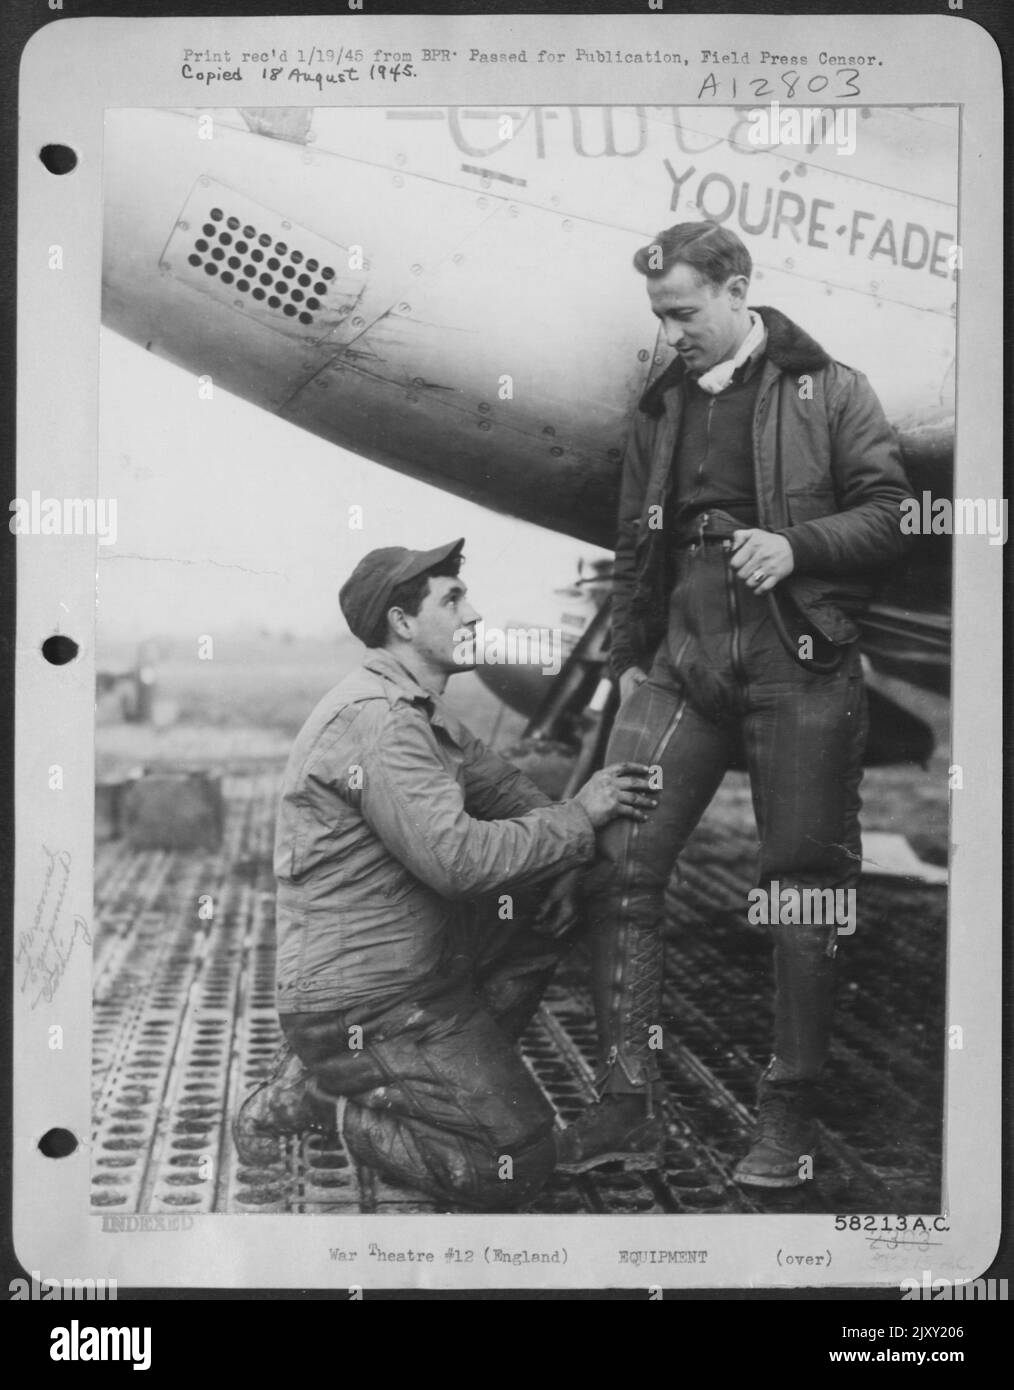 1St Lt. Harry D. Doherty, Left, Personal Equipment Officer For P-51 Mustang Fighter Group Of U.S. 8Th Af, Fits One Of The New Berger G-Suits To 1St Lt. George Rich, Fighter Pilot. The Ingenious Suit Was Designed To Combat 'Black-Outs' In Mid-Air (Airmen' Stock Photo